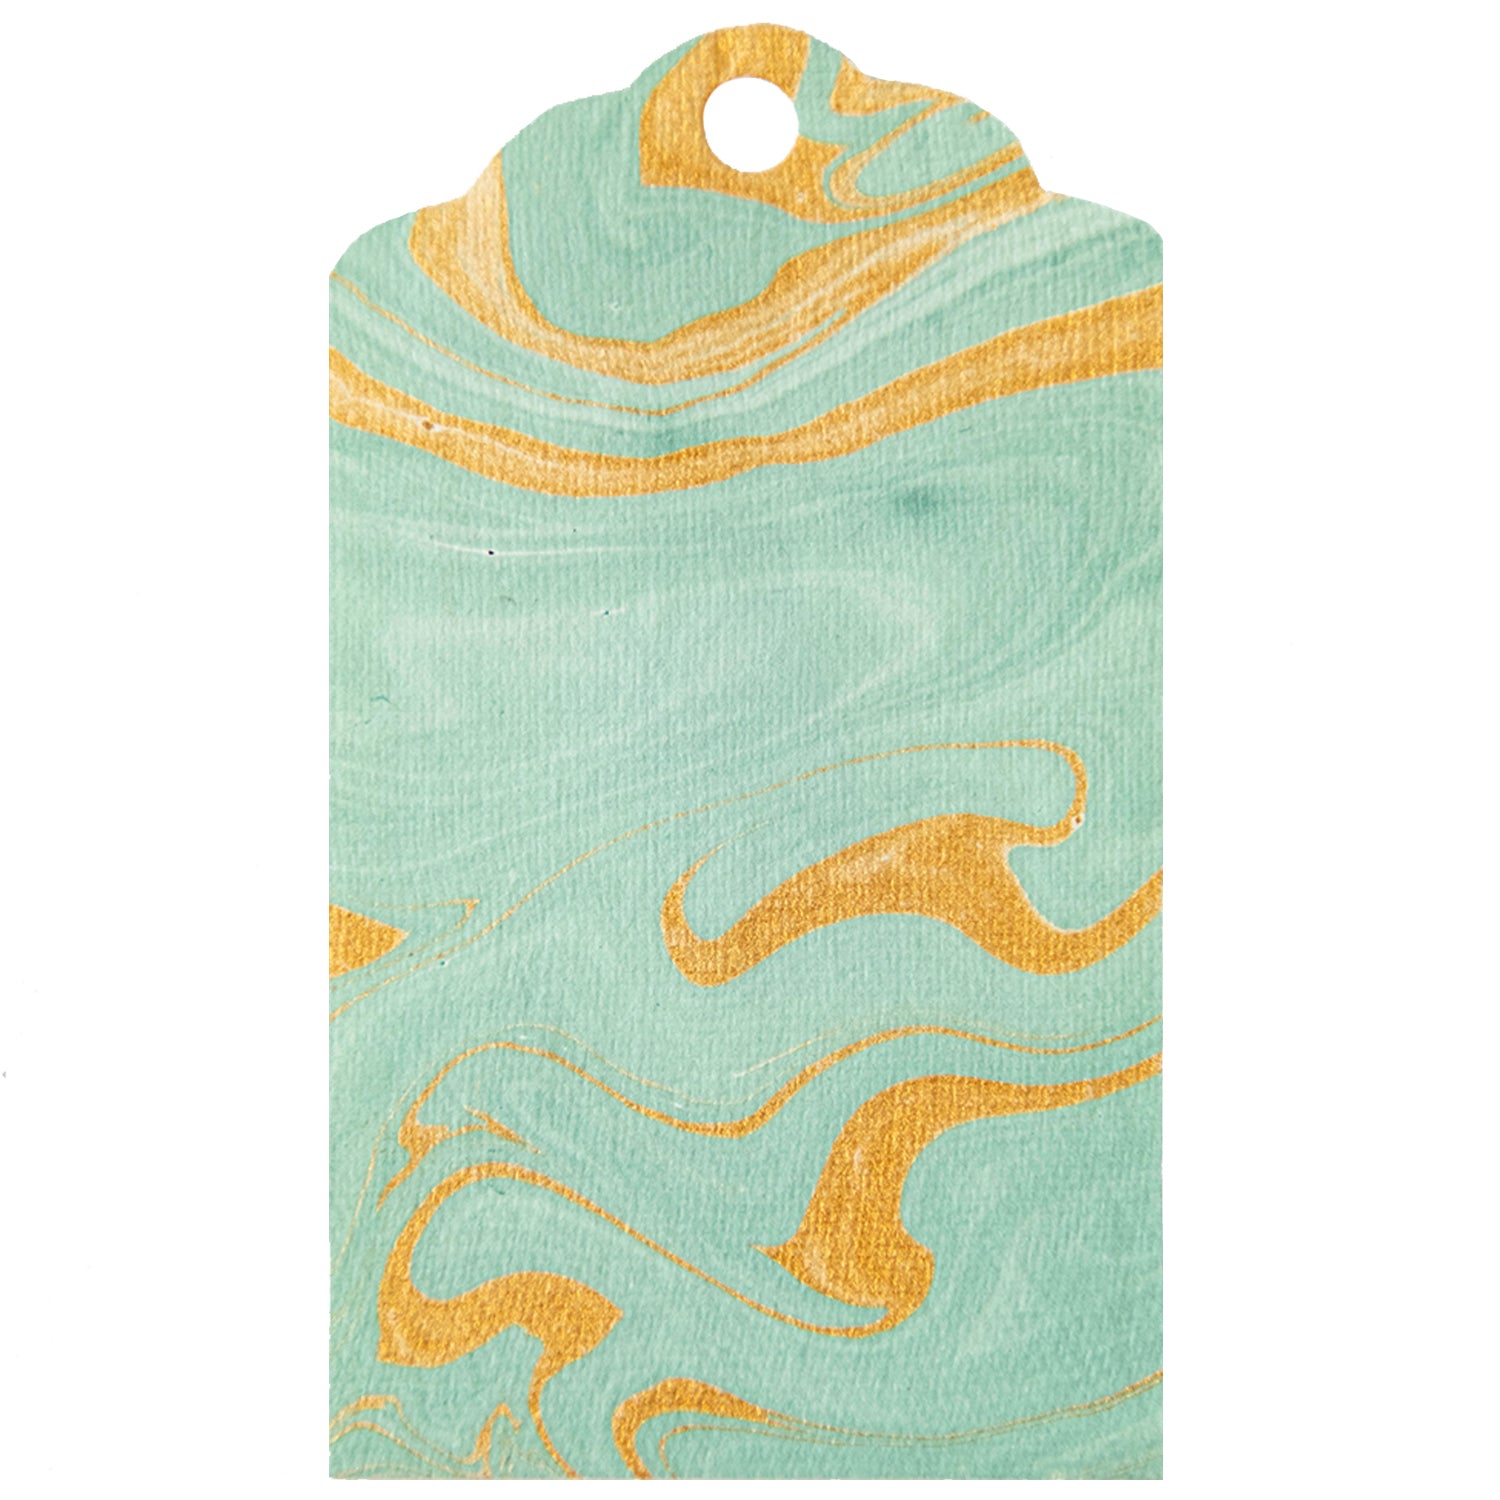 A unique, Vein Marbled Gift Tags cutting board by Hester &amp; Cook.